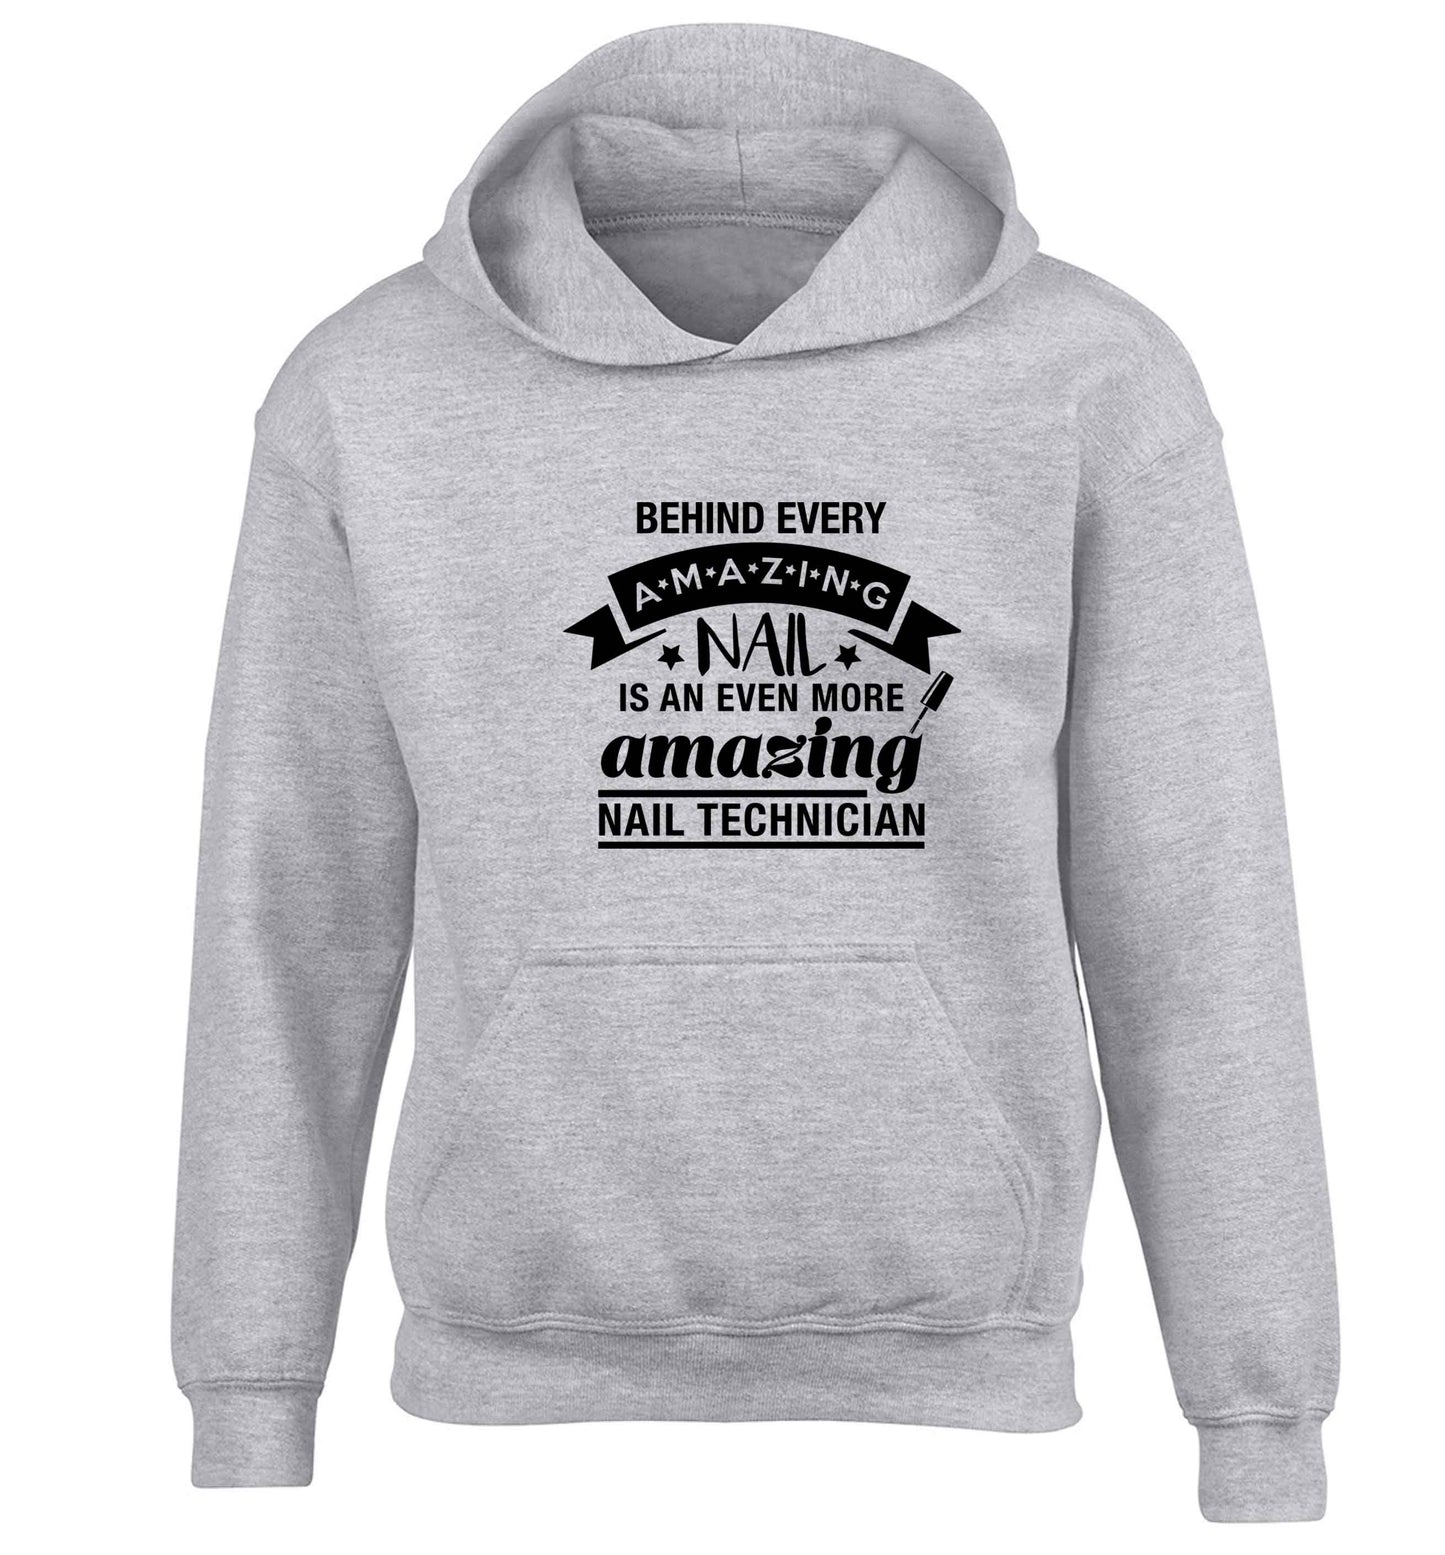 Behind every amazing nail is an even more amazing nail technician children's grey hoodie 12-13 Years